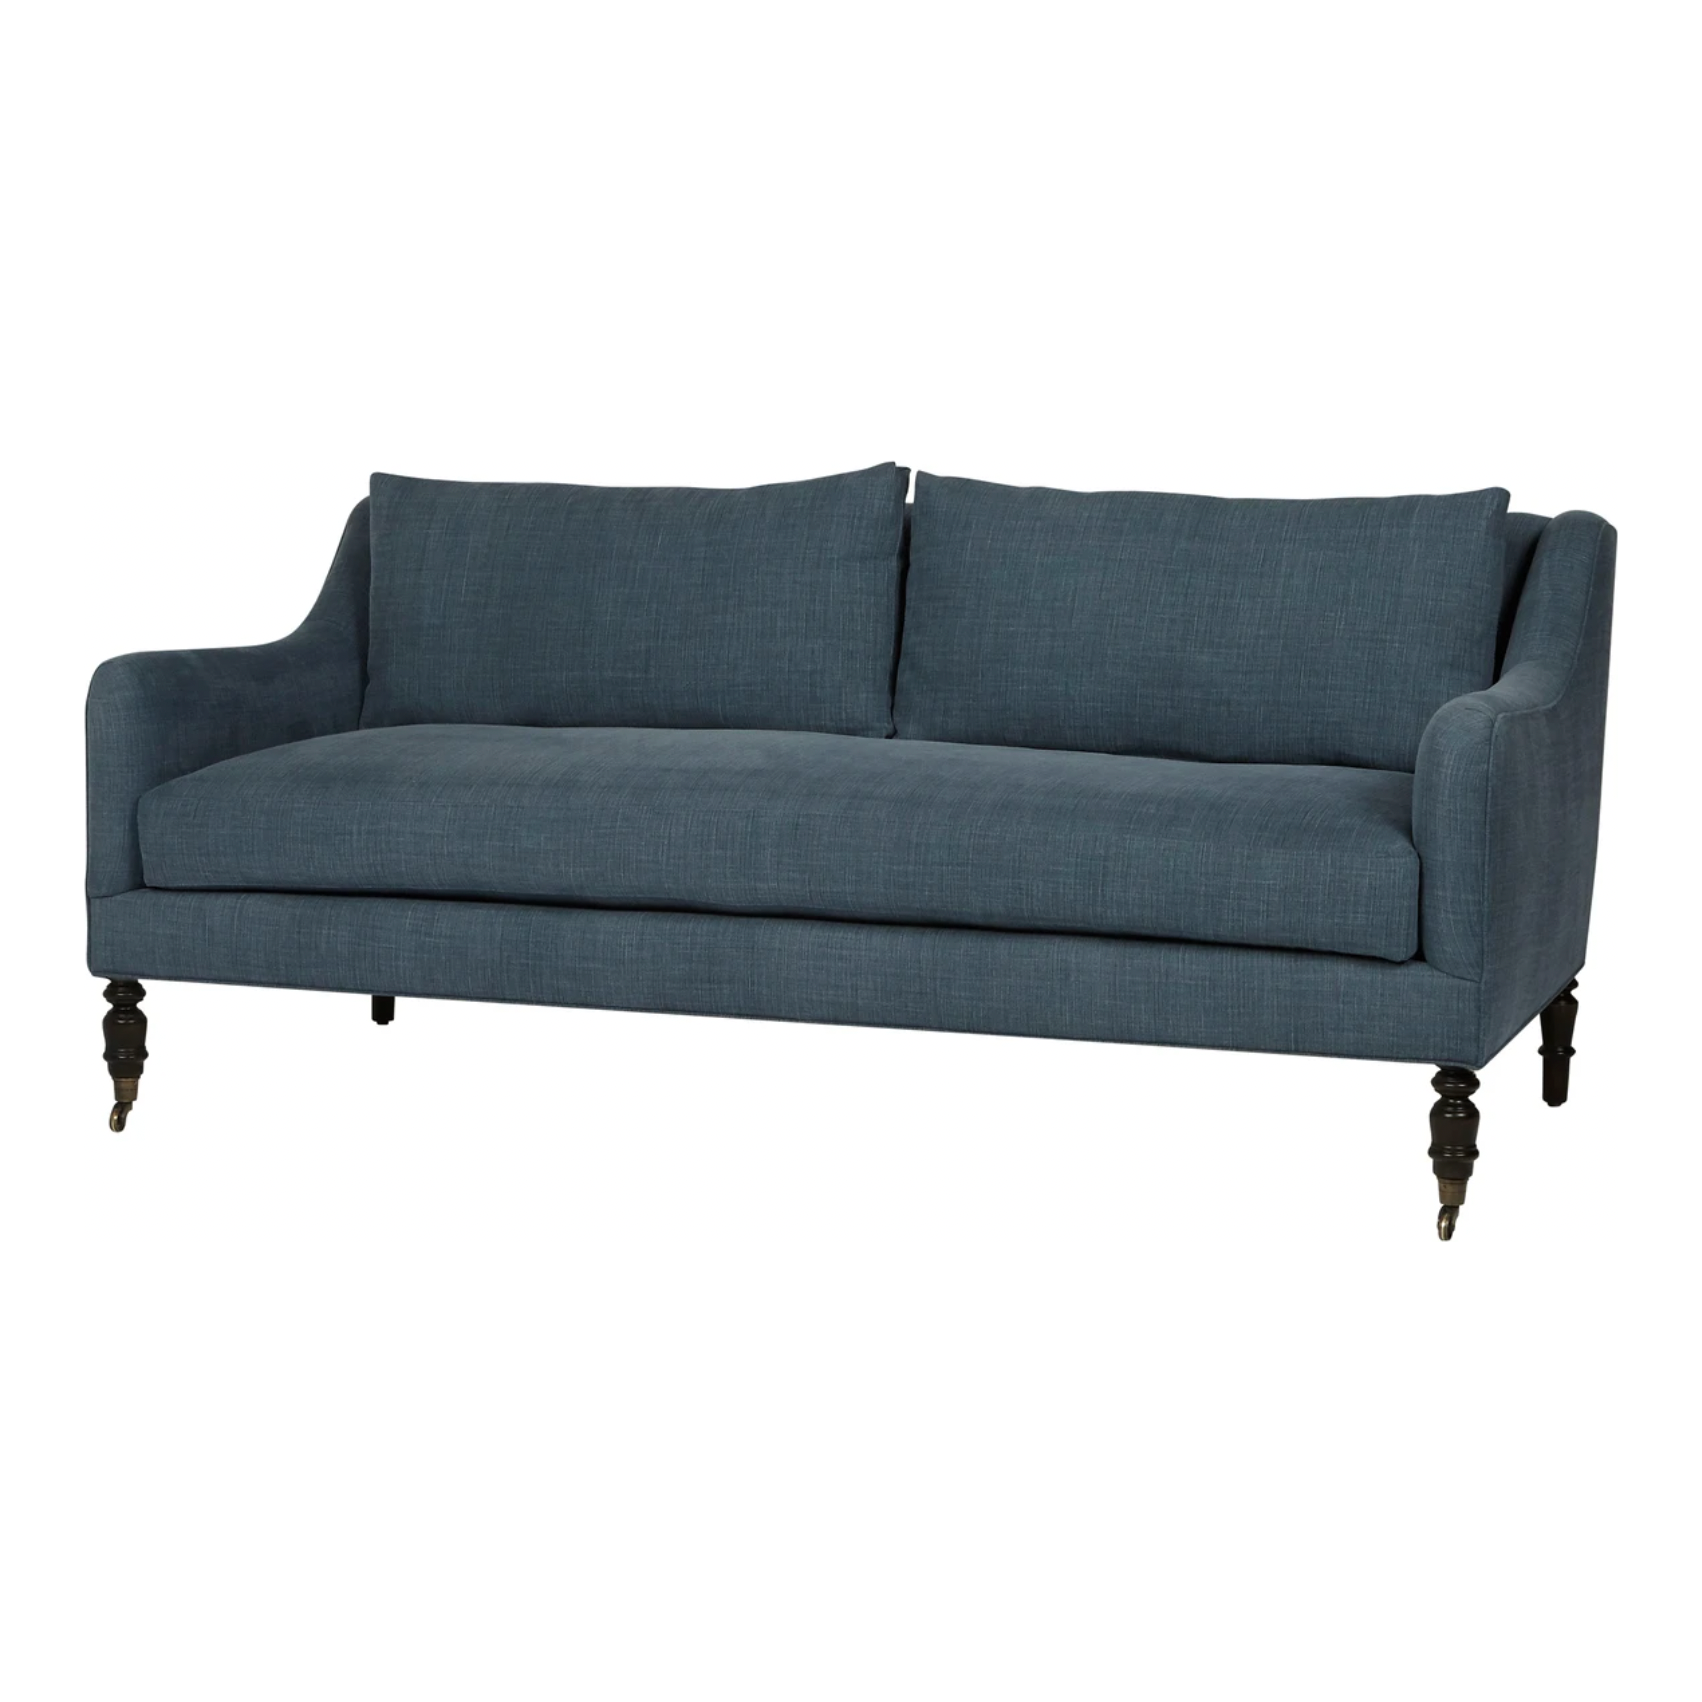 The Yvonne Upholstered Sofa by Cisco Brothers features curved arms and clean lines. The mid-century feel brings the whole family together in a comfortable, attractive seating. Photographed in Navedo Gravel and Rye Midnight Blue.      Overall: 72"w x 36"d x 31"h